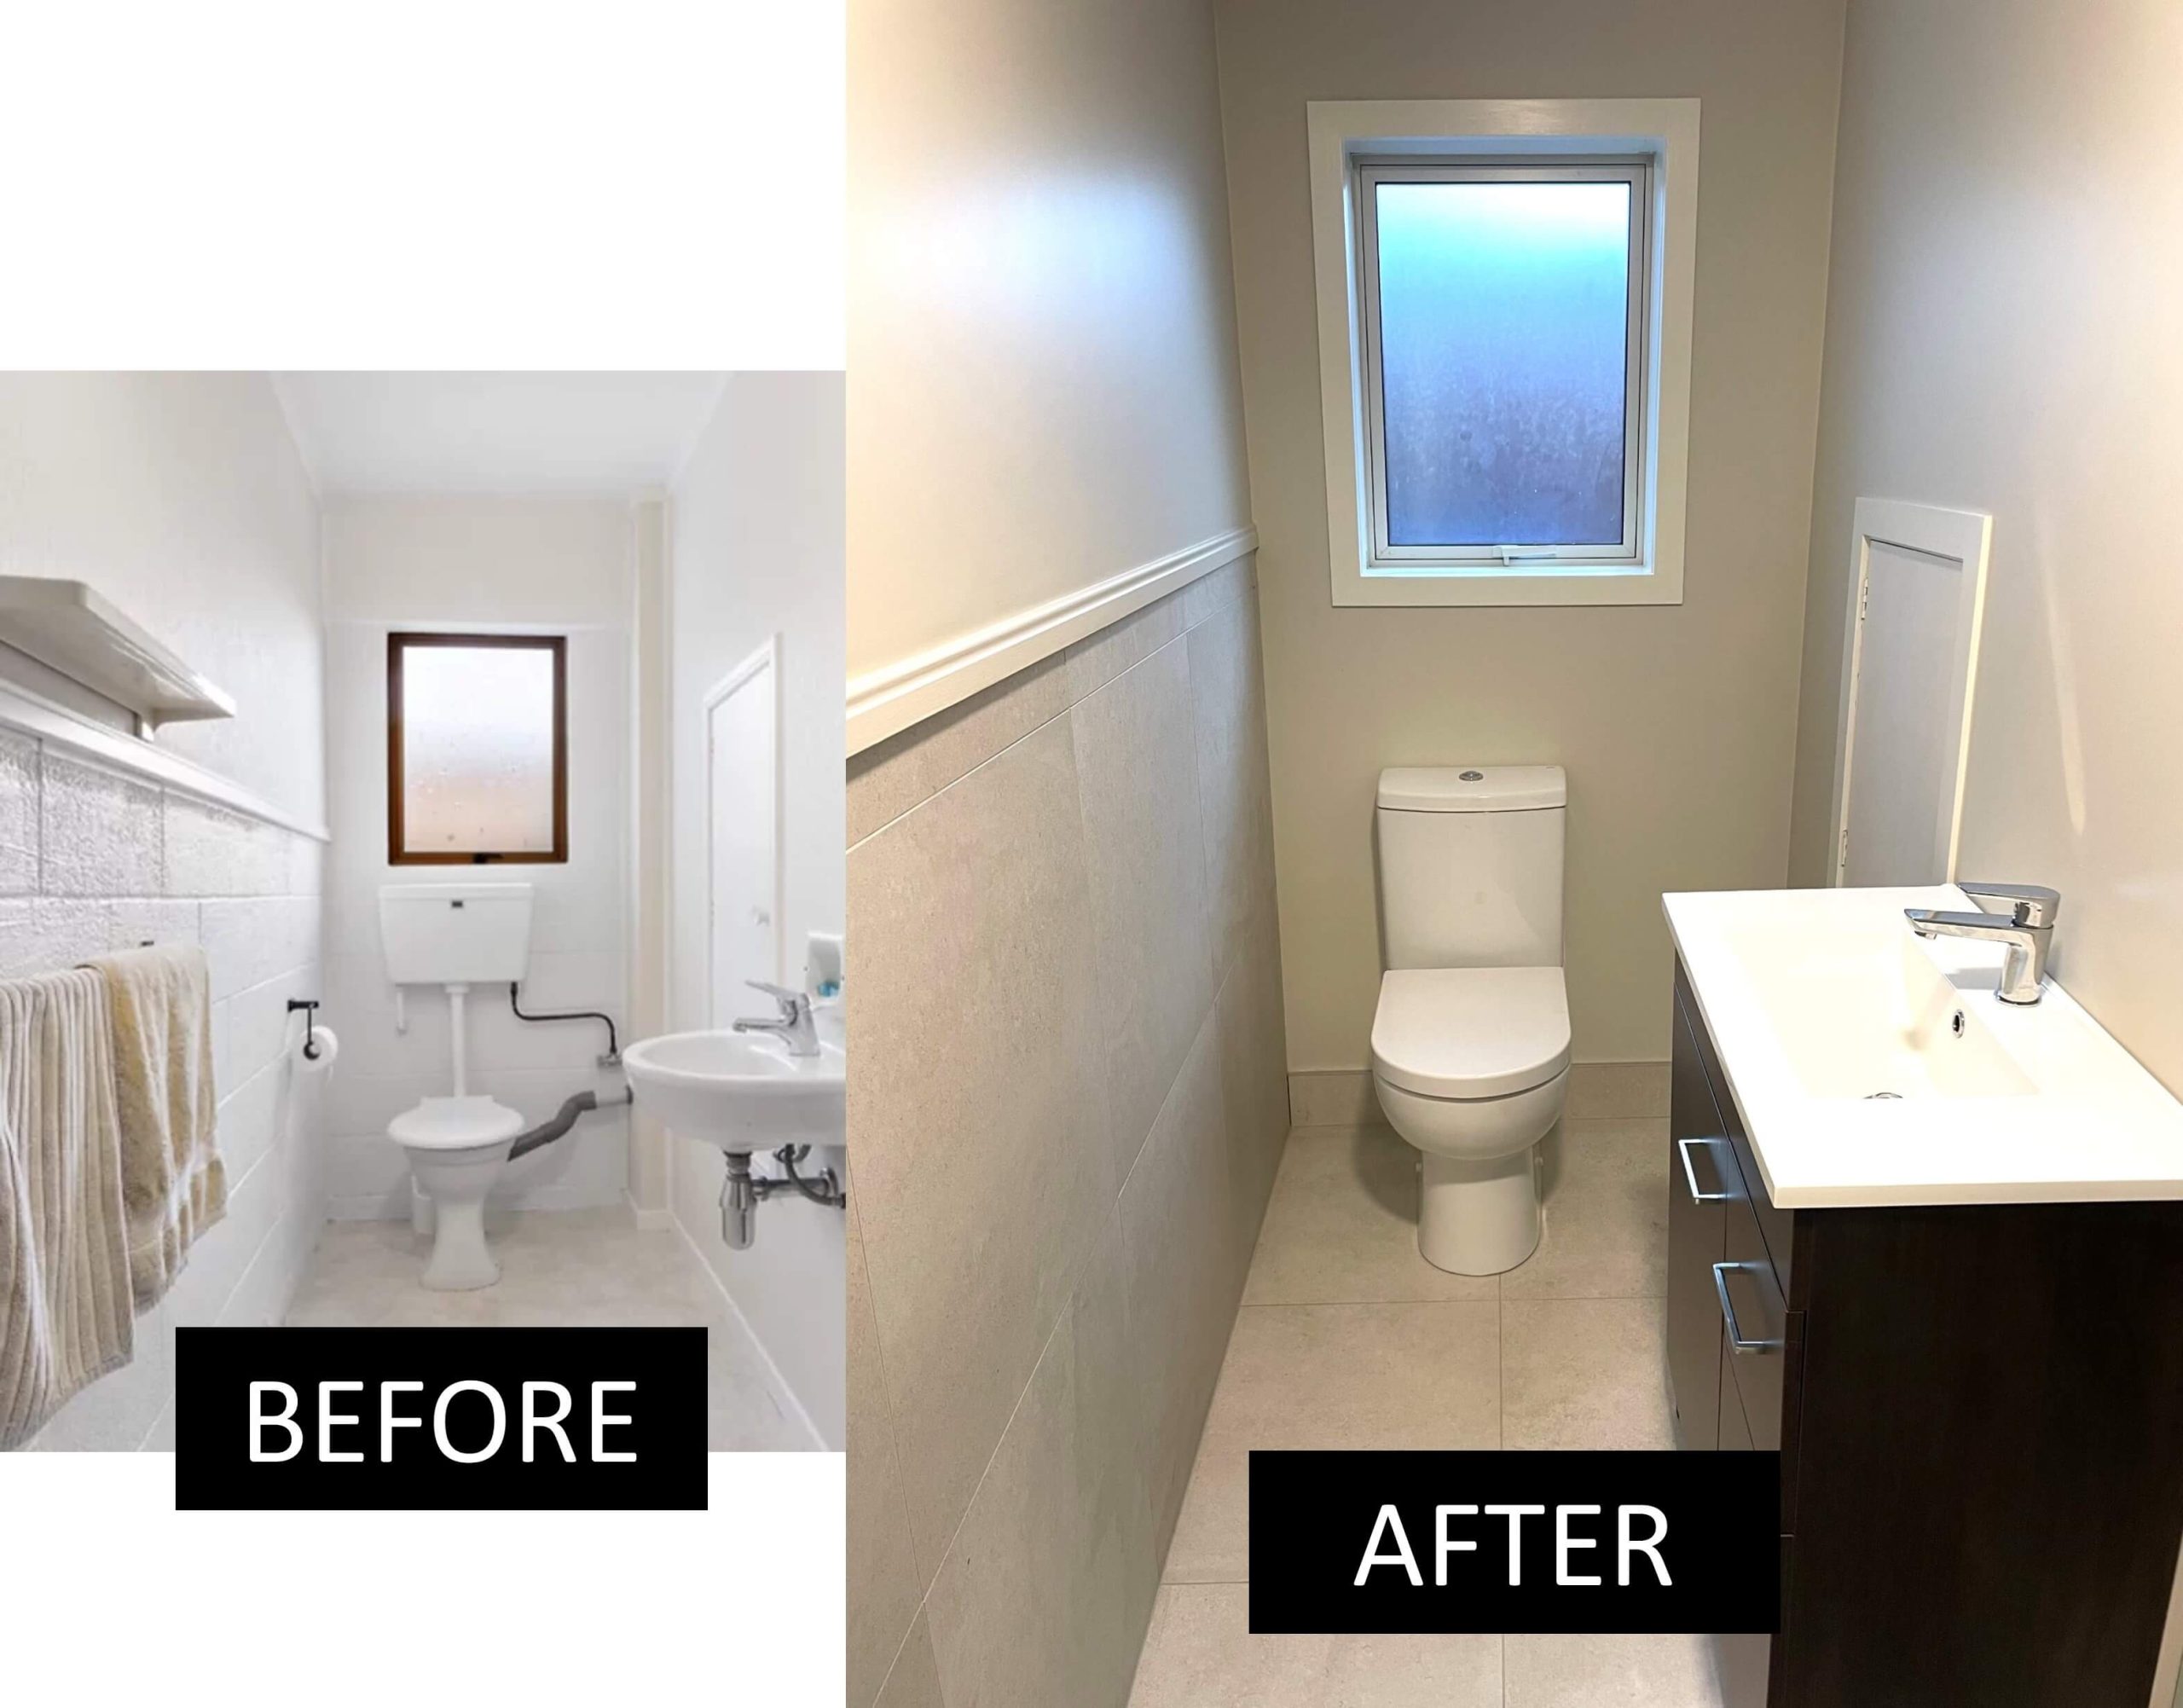 Before and after toilet